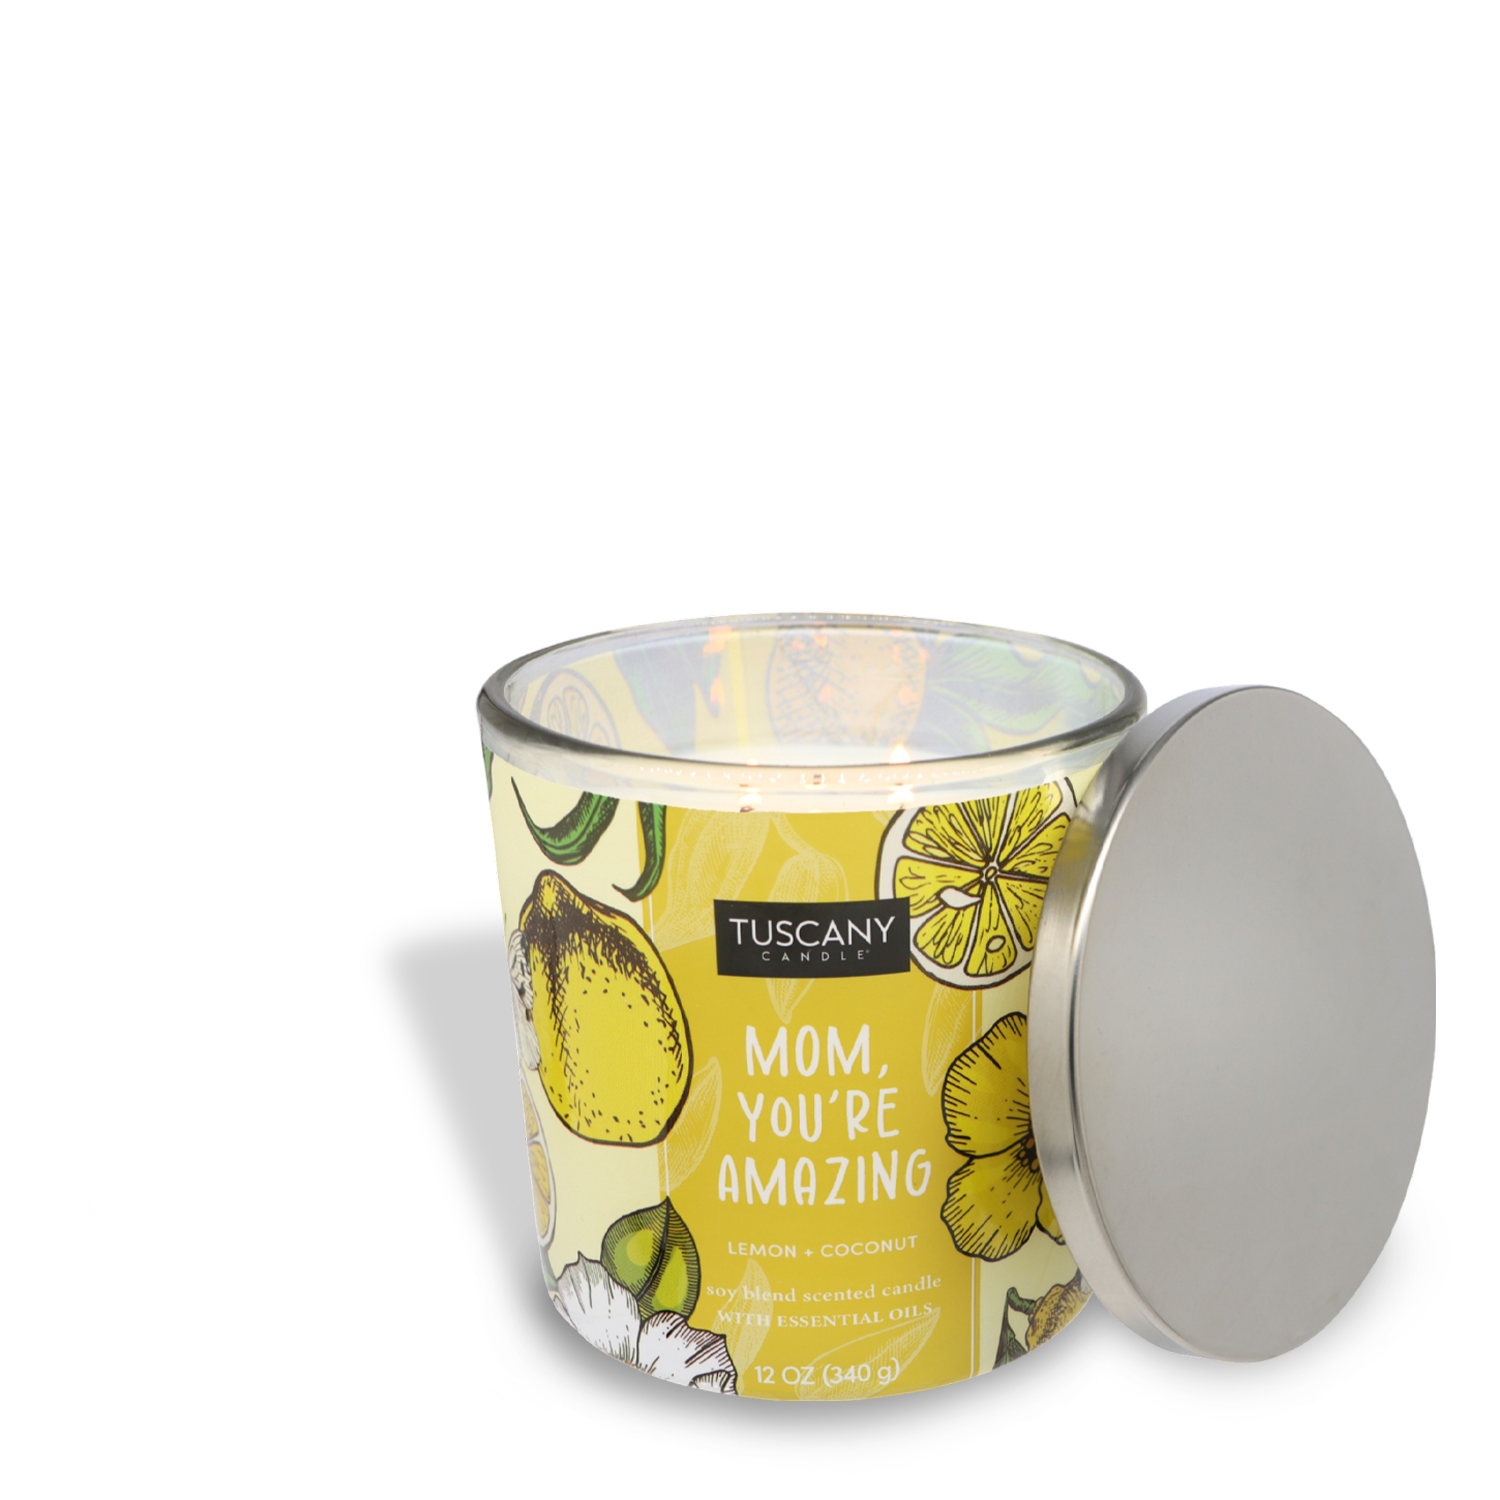 A scented candle labeled "Mom, You're Amazing (12 oz) – Mother's Day Collection" with lemon and coconut design and scent description, partially burned with a silver lid beside it.